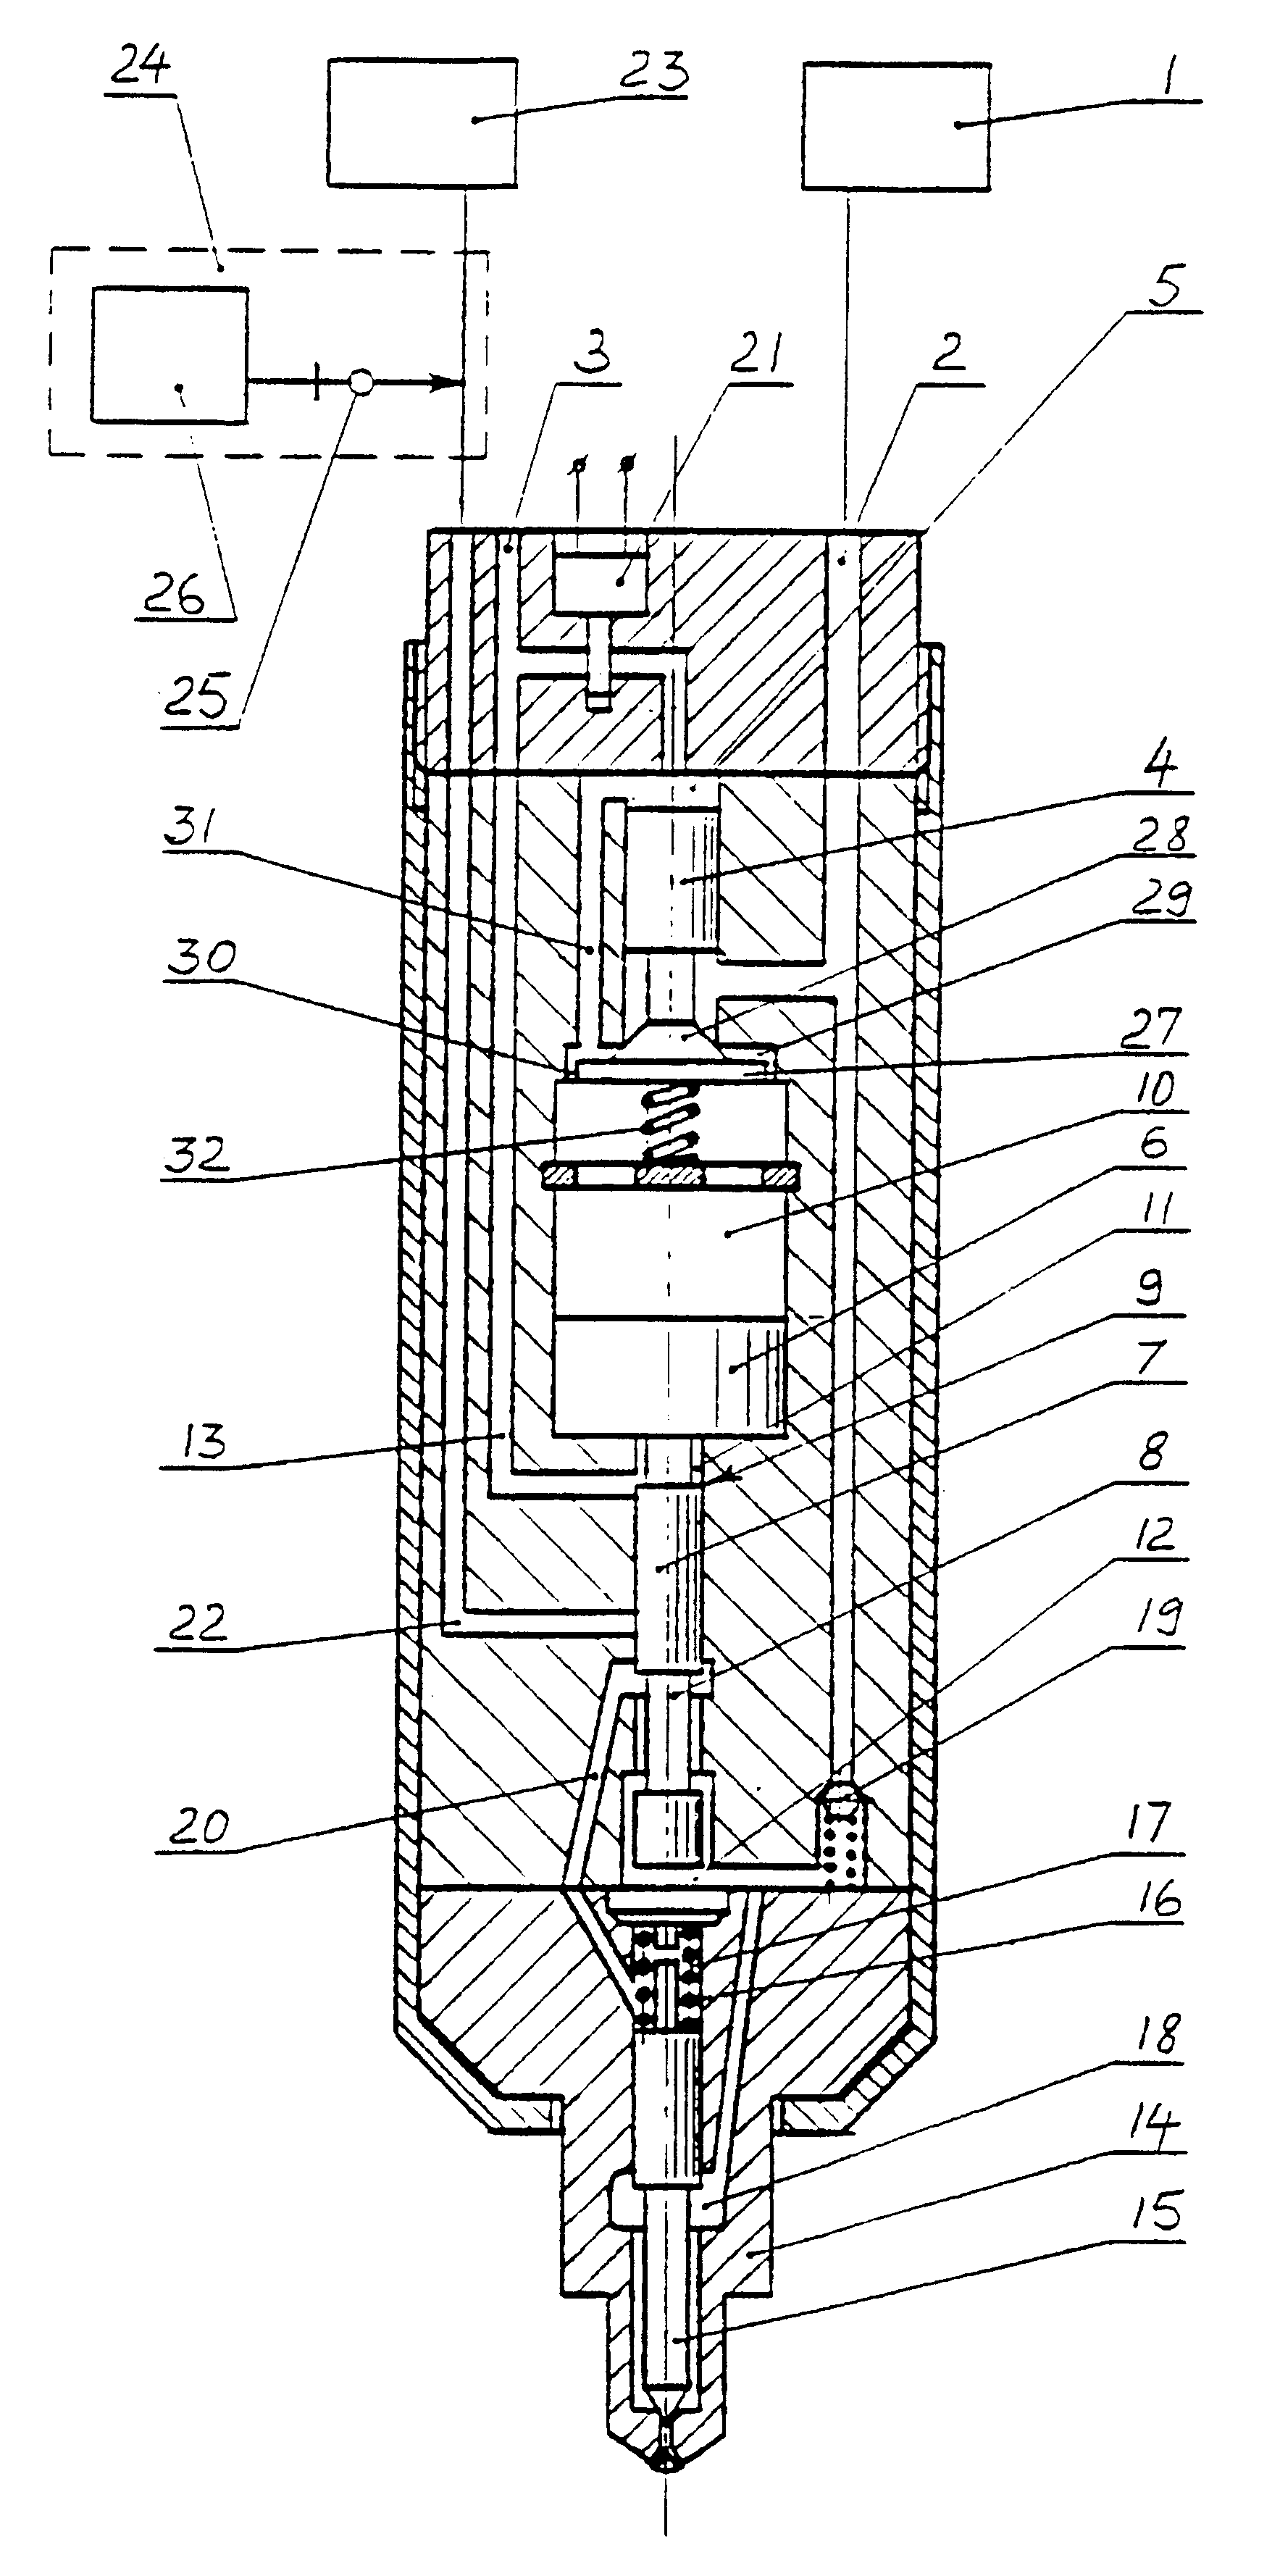 Hydraulically actuated electronic fuel injection system